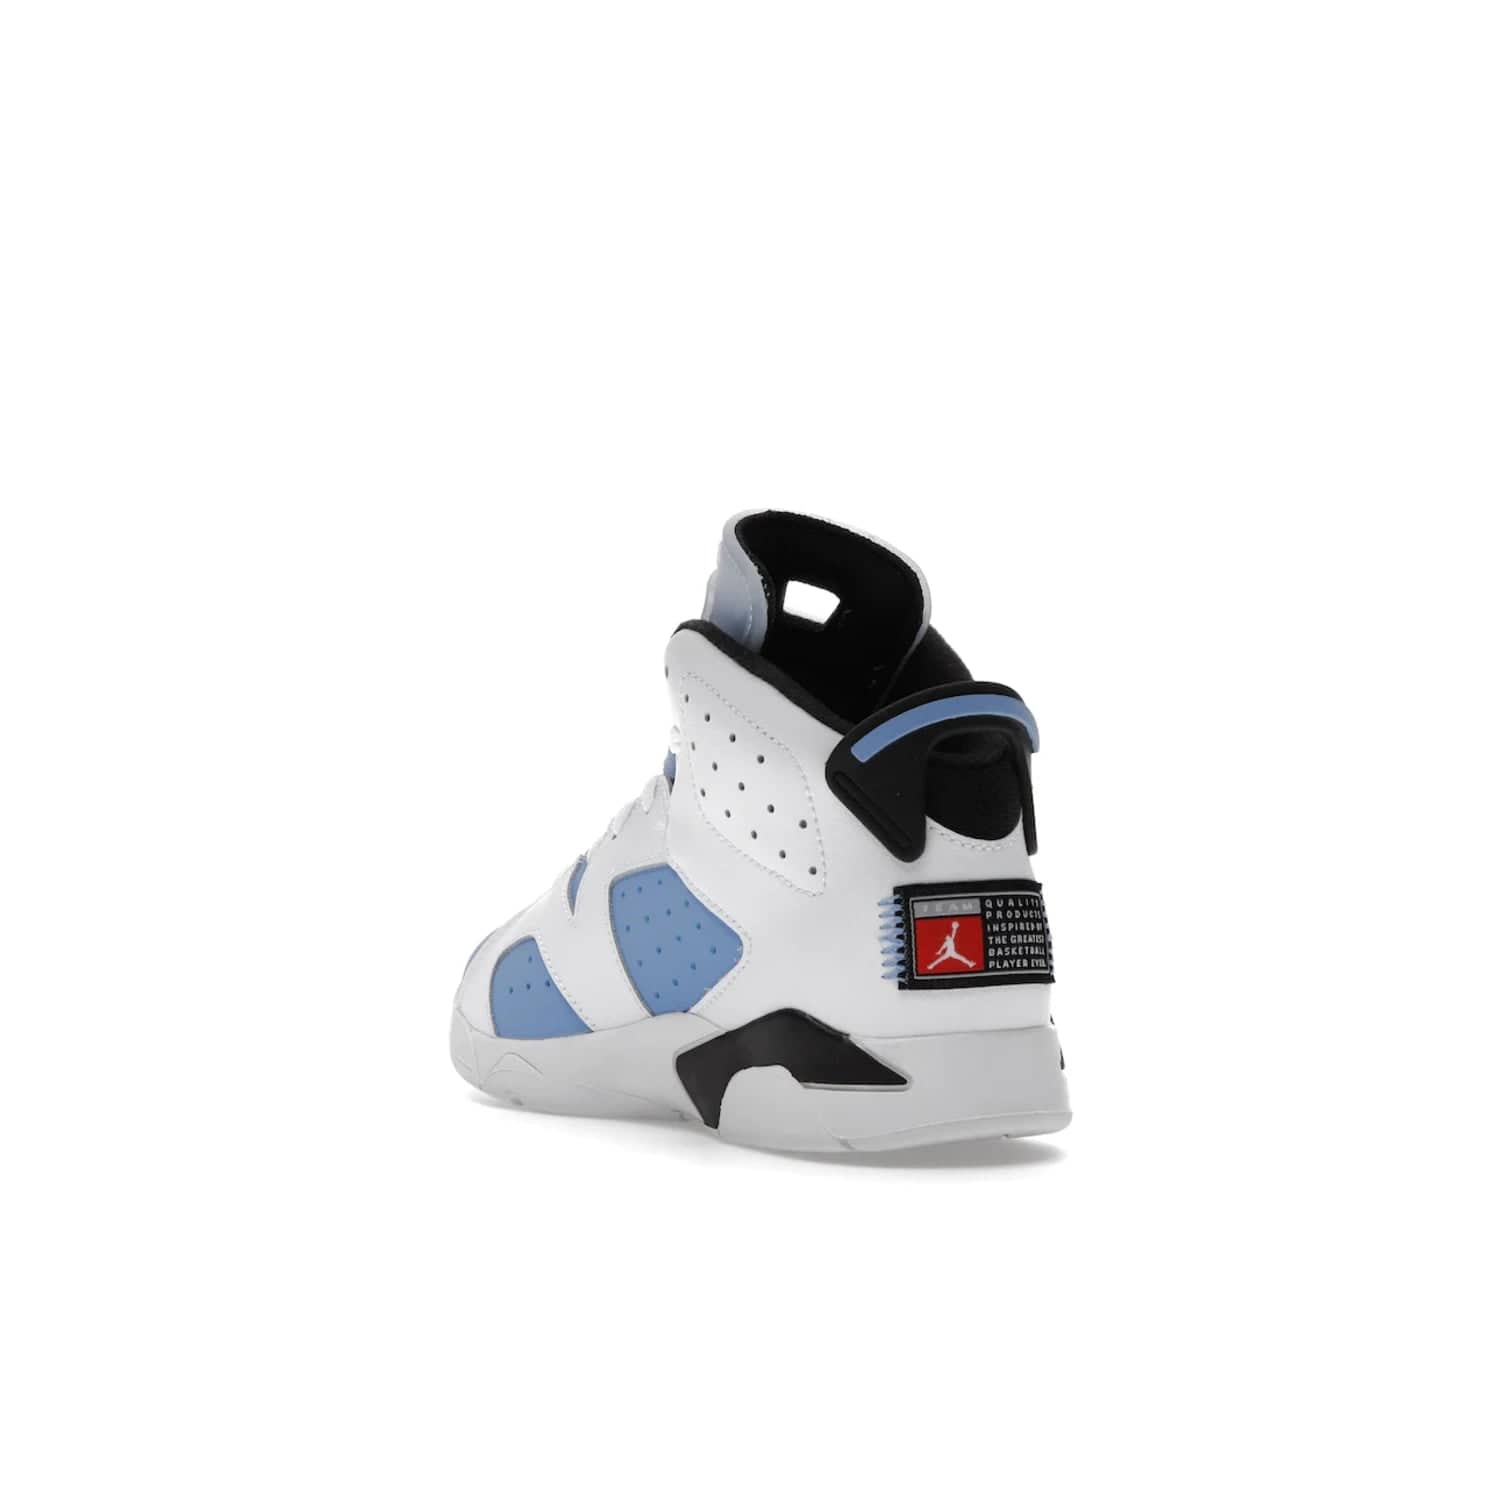 Jordan 6 Retro UNC White (PS) - Image 25 - Only at www.BallersClubKickz.com - The Air Jordan 6 Retro UNC White PS celebrates Michael Jordan's alma mater, the University of North Carolina. It features a classic color-blocking of the iconic Jordan 6 Carmine and a stitched Jordan Team patch. This must-have sneaker released on April 27th, 2022. Referencing the university colors, get this shoe for a stylish and timeless style with university pride.